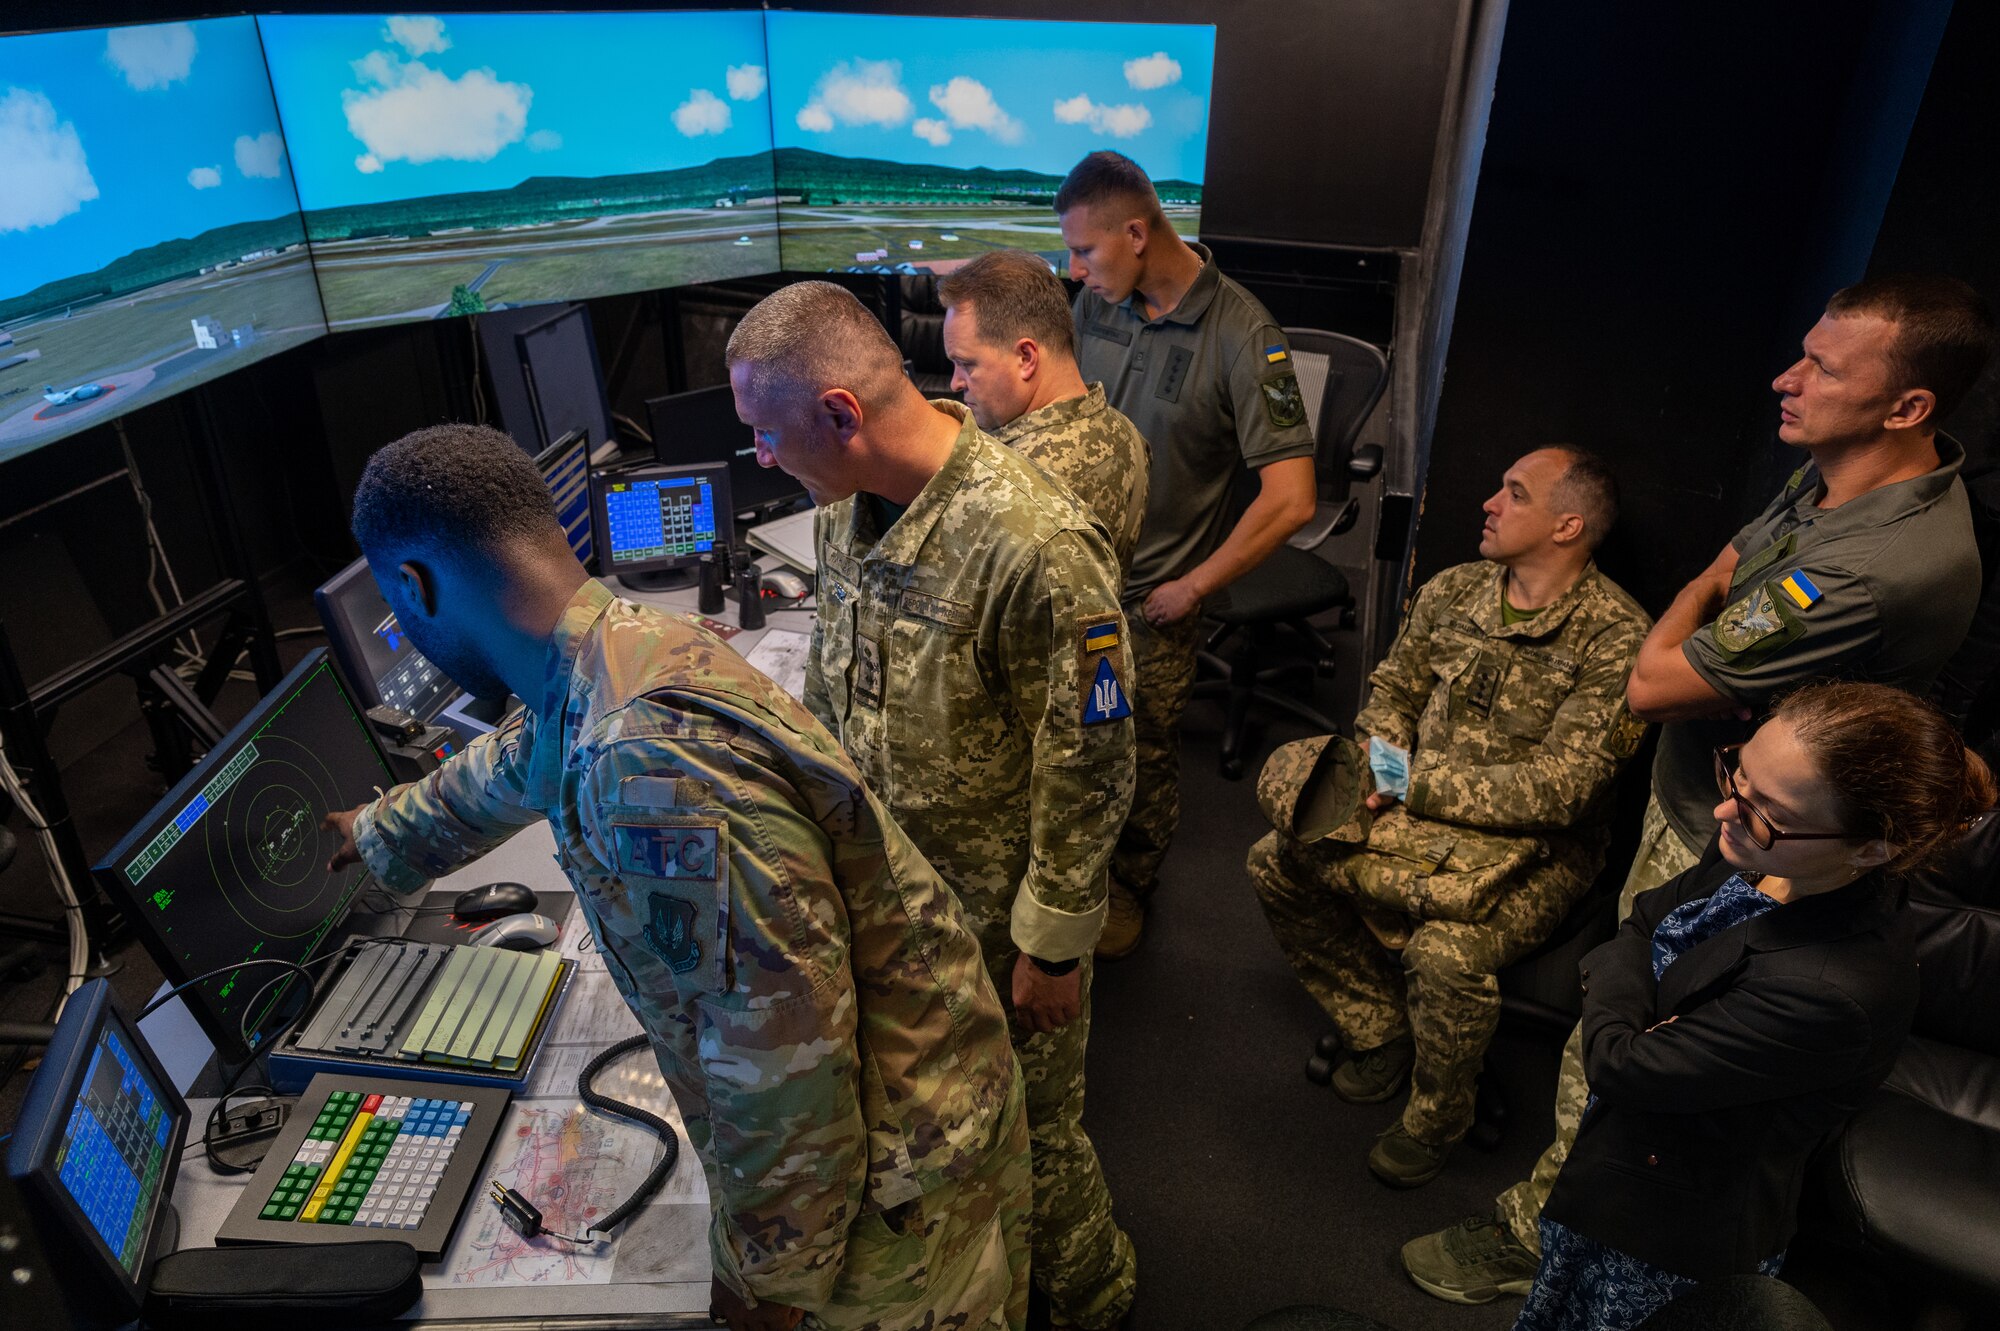 Service members standing next to control panels and monitors.